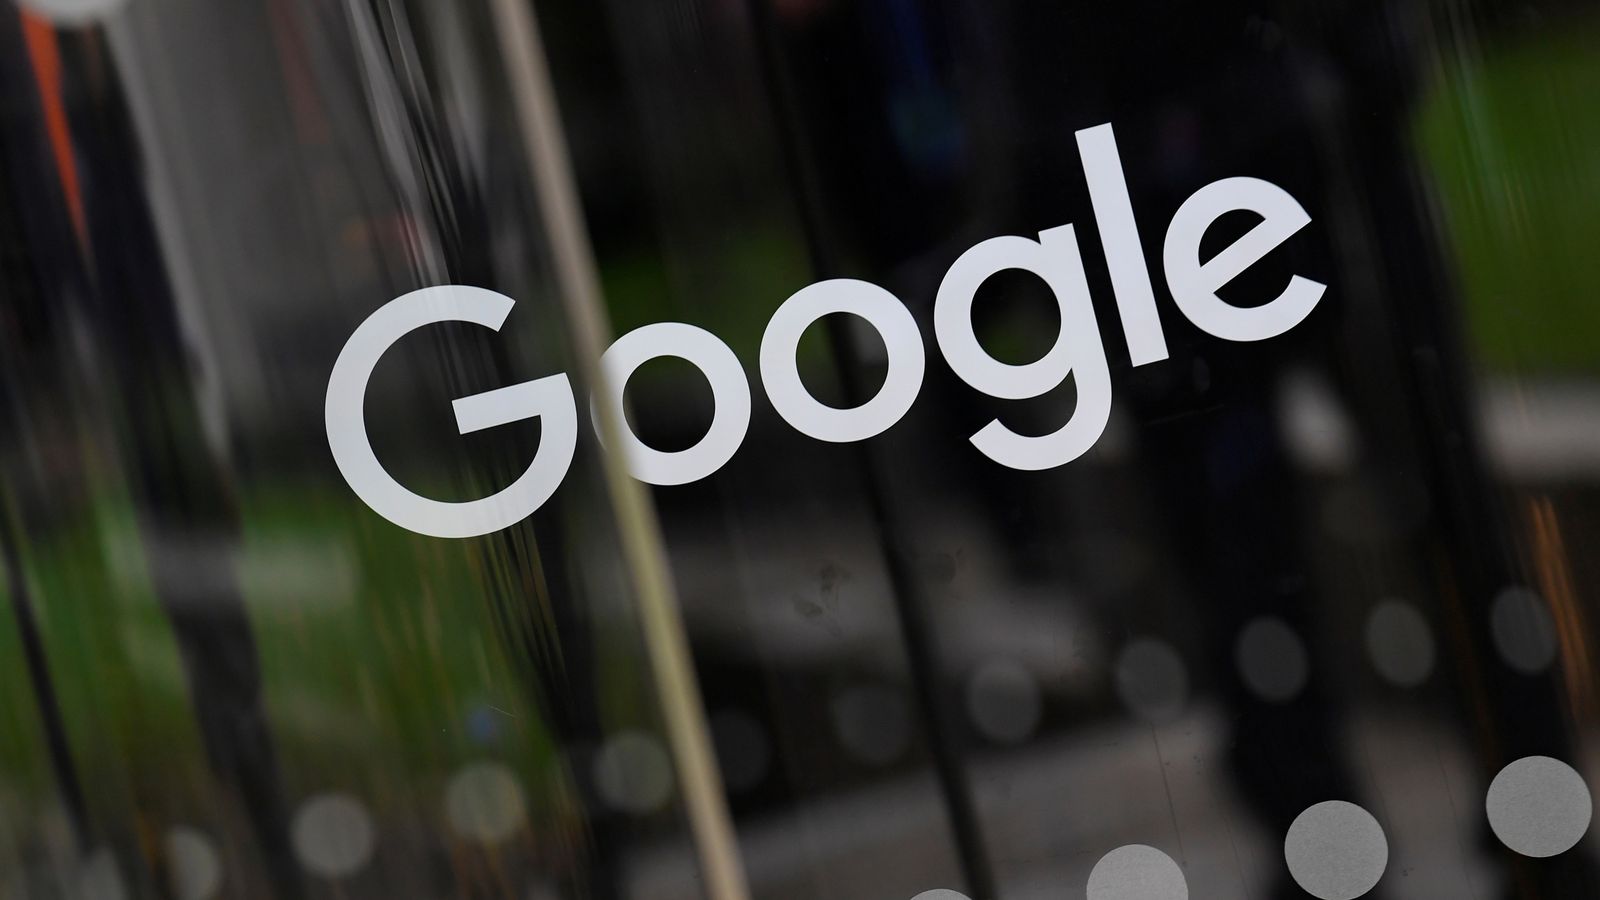 Google poised to unveil artificial intelligence plans to take on ChatGPT